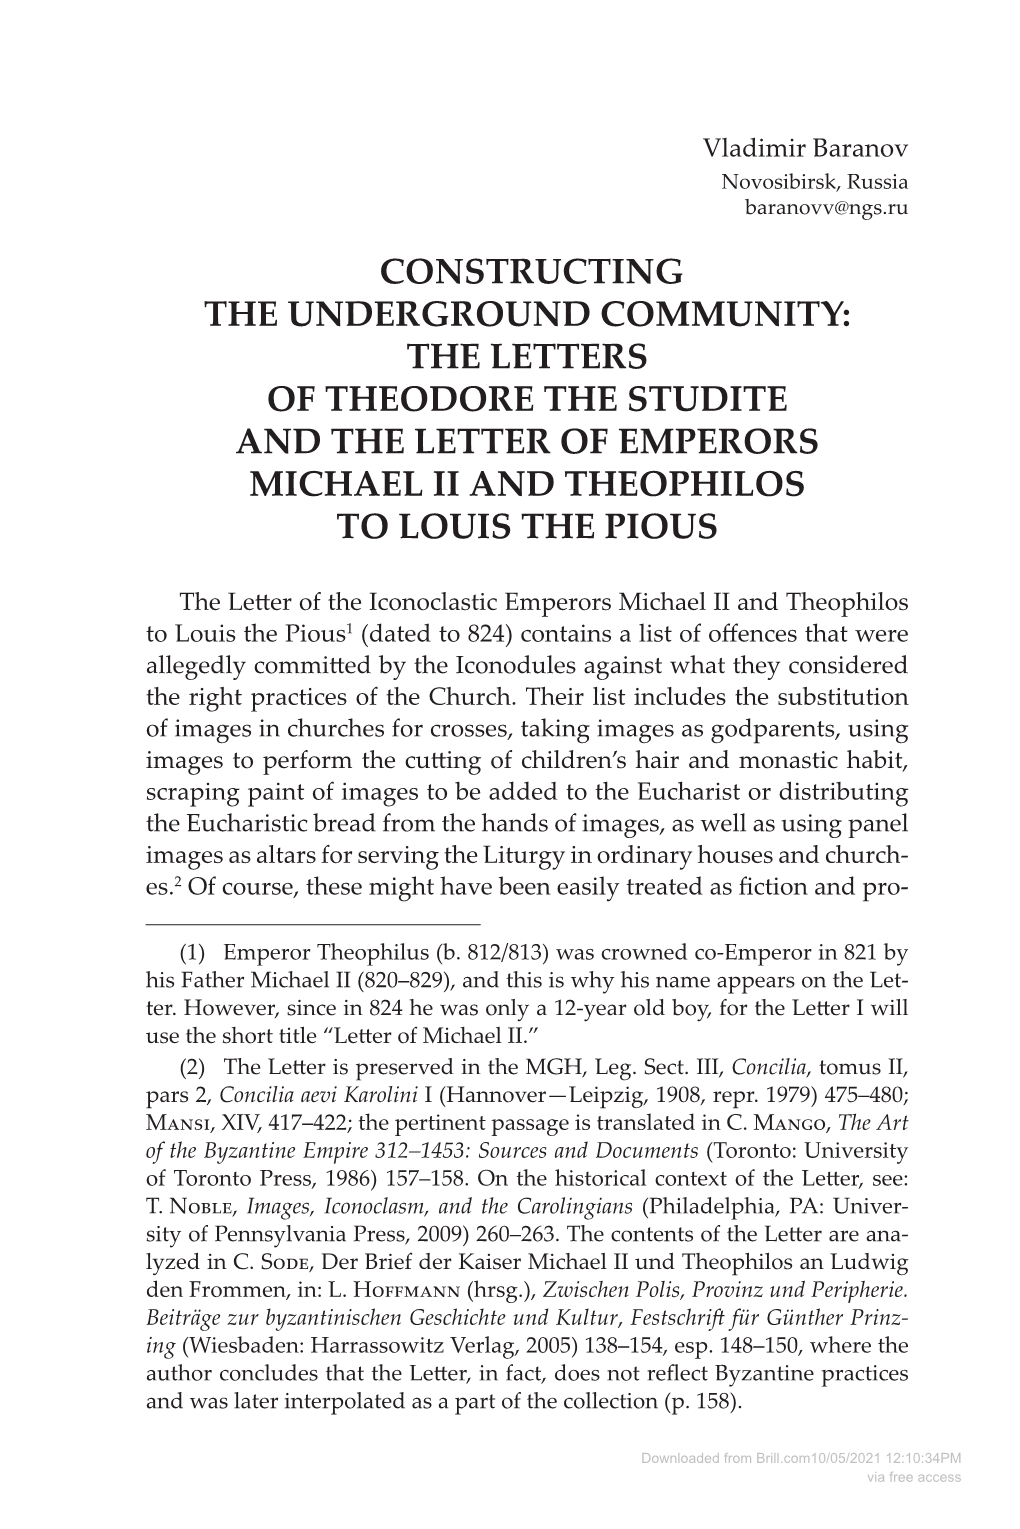 The Letters of Theodore the Studite and the Letter of Emperors Michael Ii and Theophilos to Louis the Pious